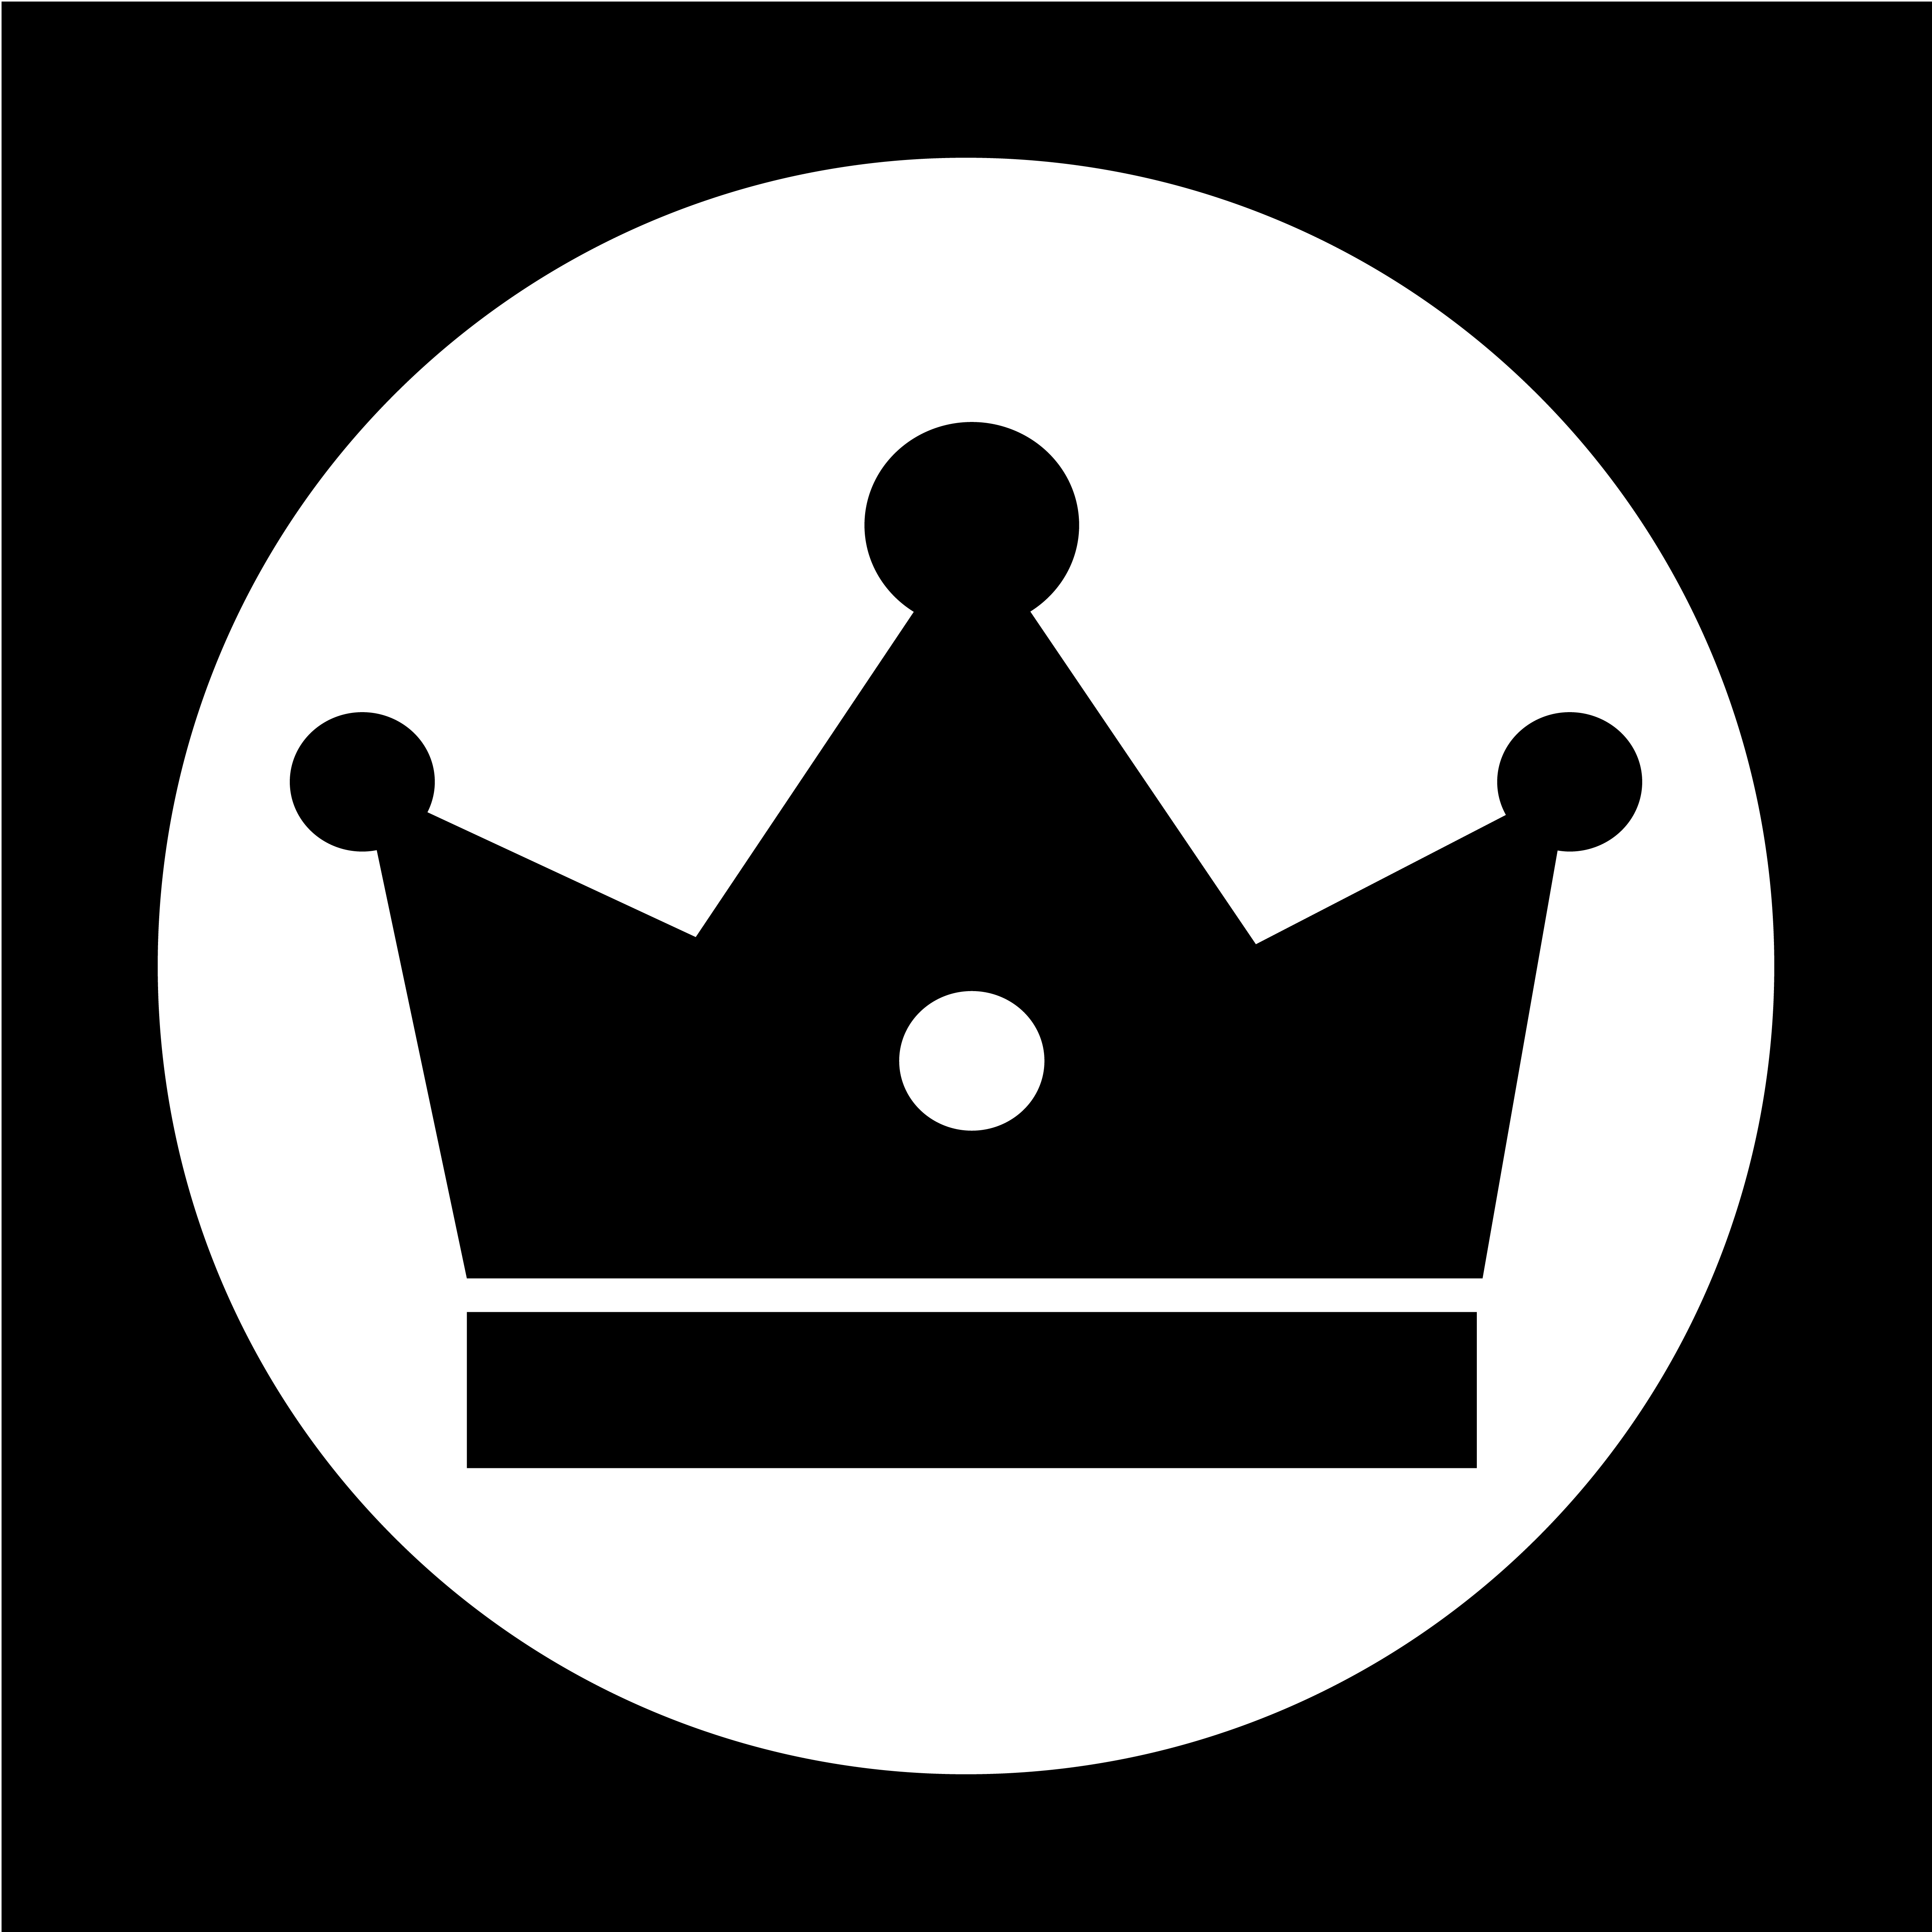 Download Sign of Crown icon - Download Free Vectors, Clipart ...